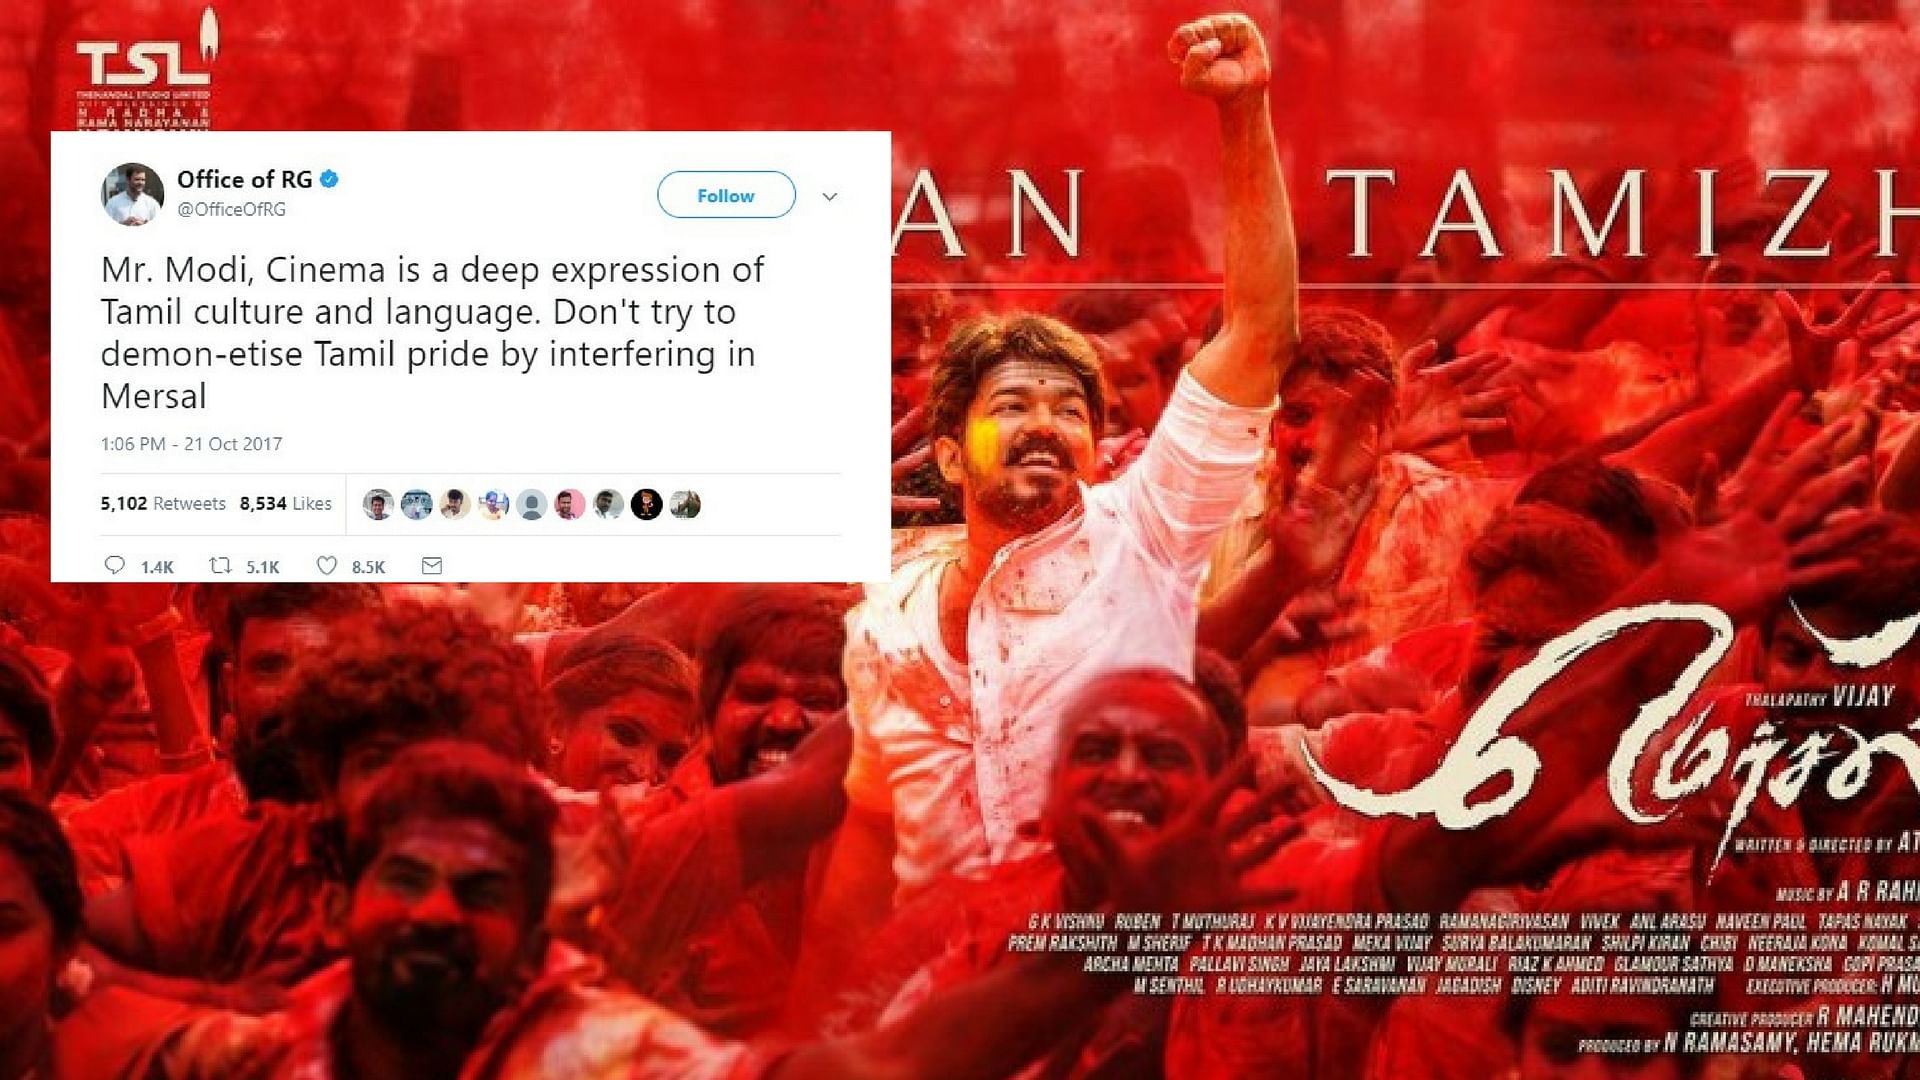 Congress attacks the BJP over the Mersal controversy